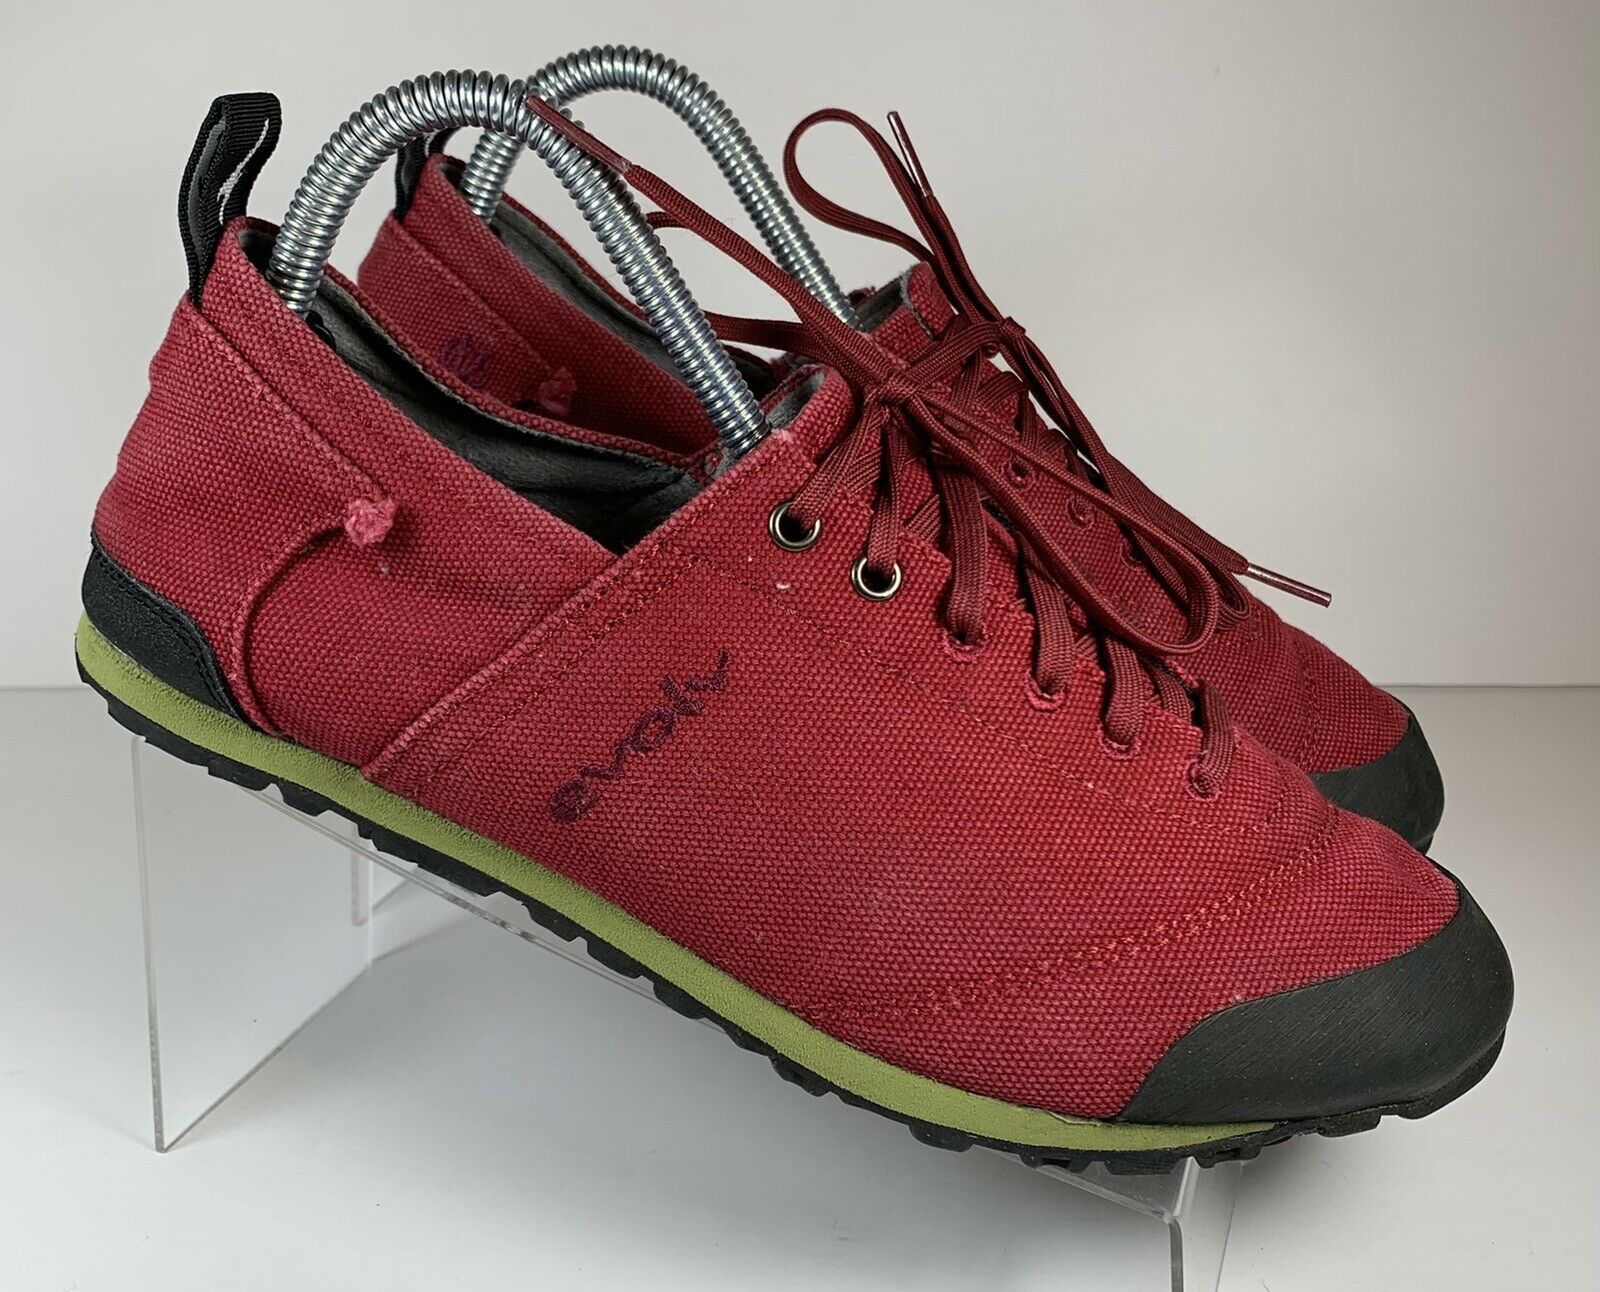 Evolv rock climbing shoes Red lace up Trax usa Men 9.5 Women 10.5